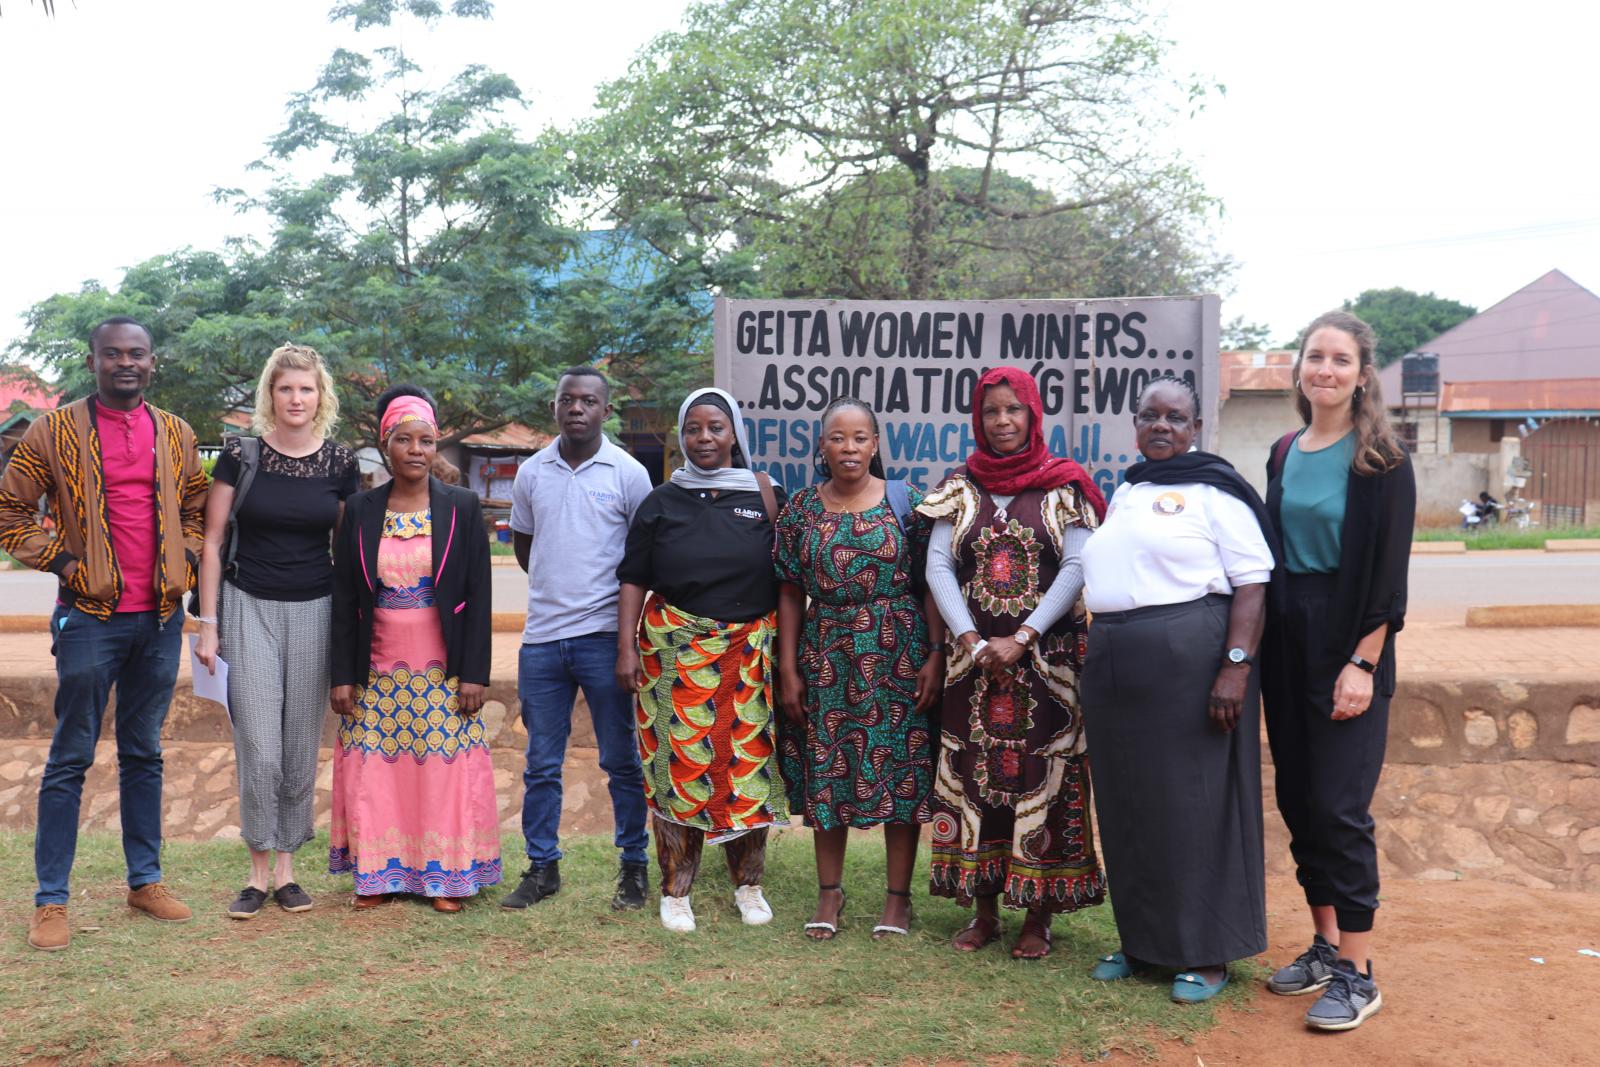 The CLARITY team with a group from HR services company Randstad, who are involved in the project’s business component, visiting GEWOMA as part of a monitoring and evaluation exercise. 